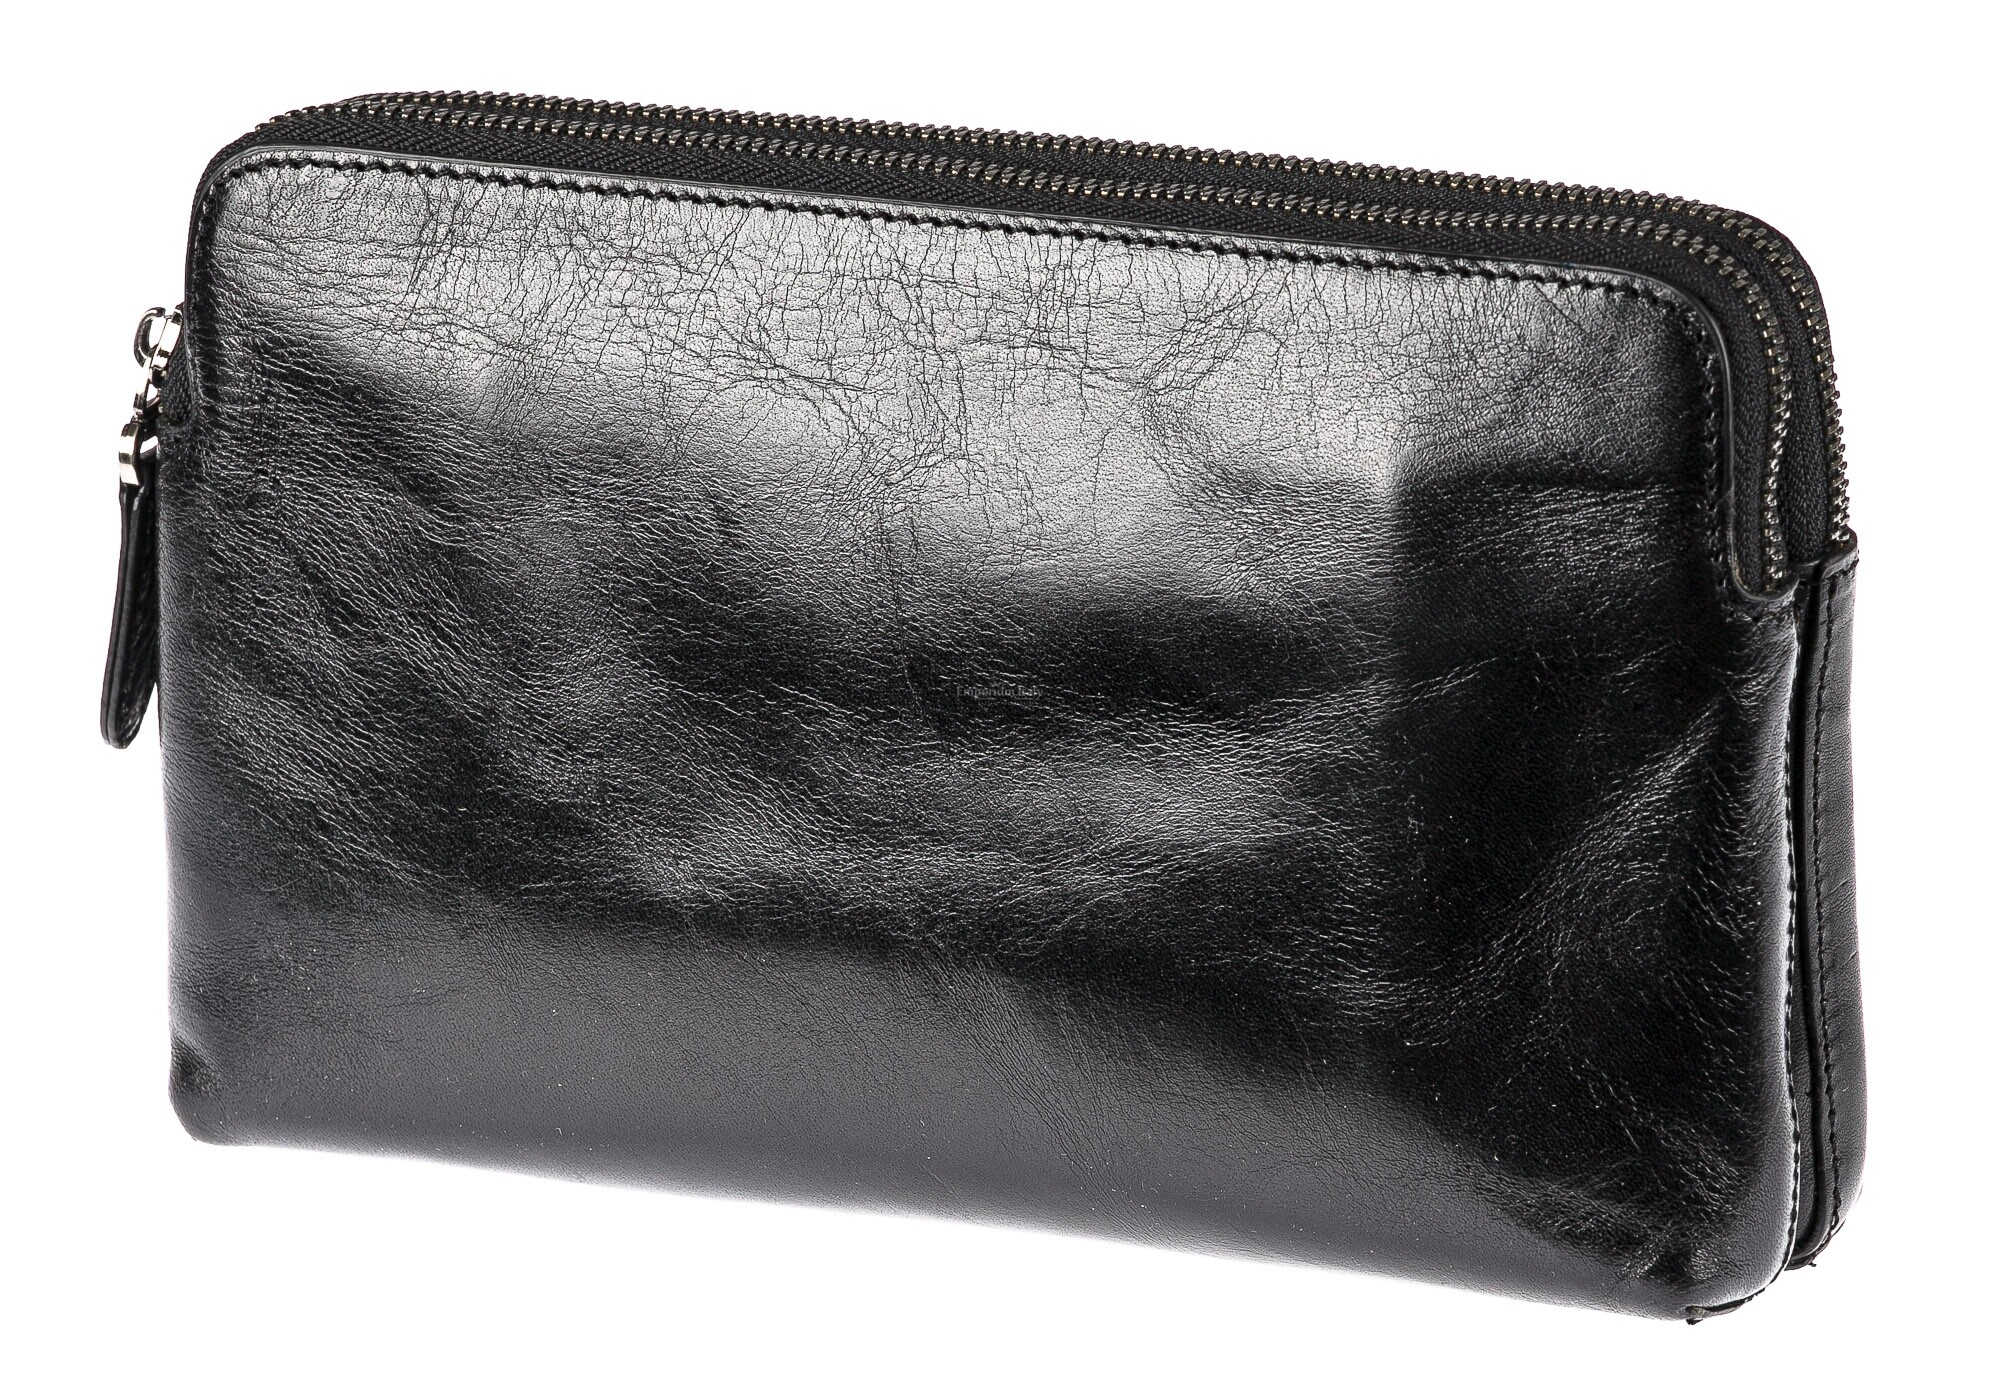 Genuine leather clutch for man JAMES, BLACK colour, CHIAROSCURO, MADE IN  ITALY, RECOMMENDED